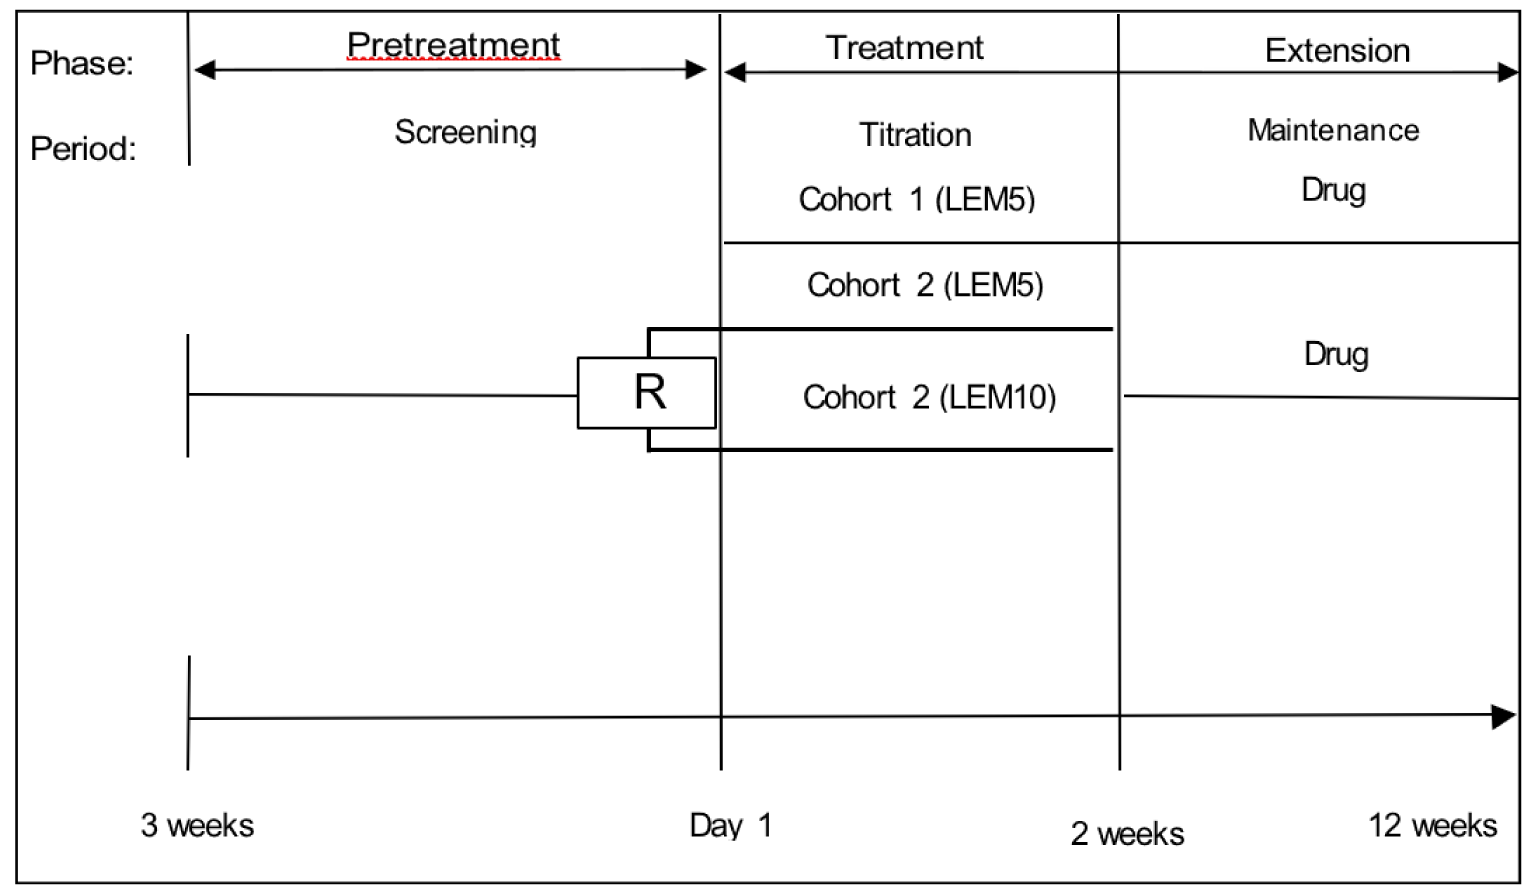 The trial consisted of 3 phases: the pretreatment, treatment, and extension phases. The core trial consisted of the pretreatment and treatment phases. The pretreatment phase consisted of a screening period and 1-day baseline period, during which patients were assessed for eligibility to participate in the trial. During the treatment period, all eligible patients self-administered lemborexant at doses of 5 mg or 10 mg for 2 weeks. Patients in cohort 1 all began treatment on lemborexant 5 mg, while those in cohort 2 were randomized in a 1:1 ratio to begin treatment on lemborexant 5 mg (cohort 2A) or lemborexant 10 mg (cohort 2B). After the end of the treatment phase, patients either entered a 12-week maintenance period of the extension phase, or a 4-week follow-up period.